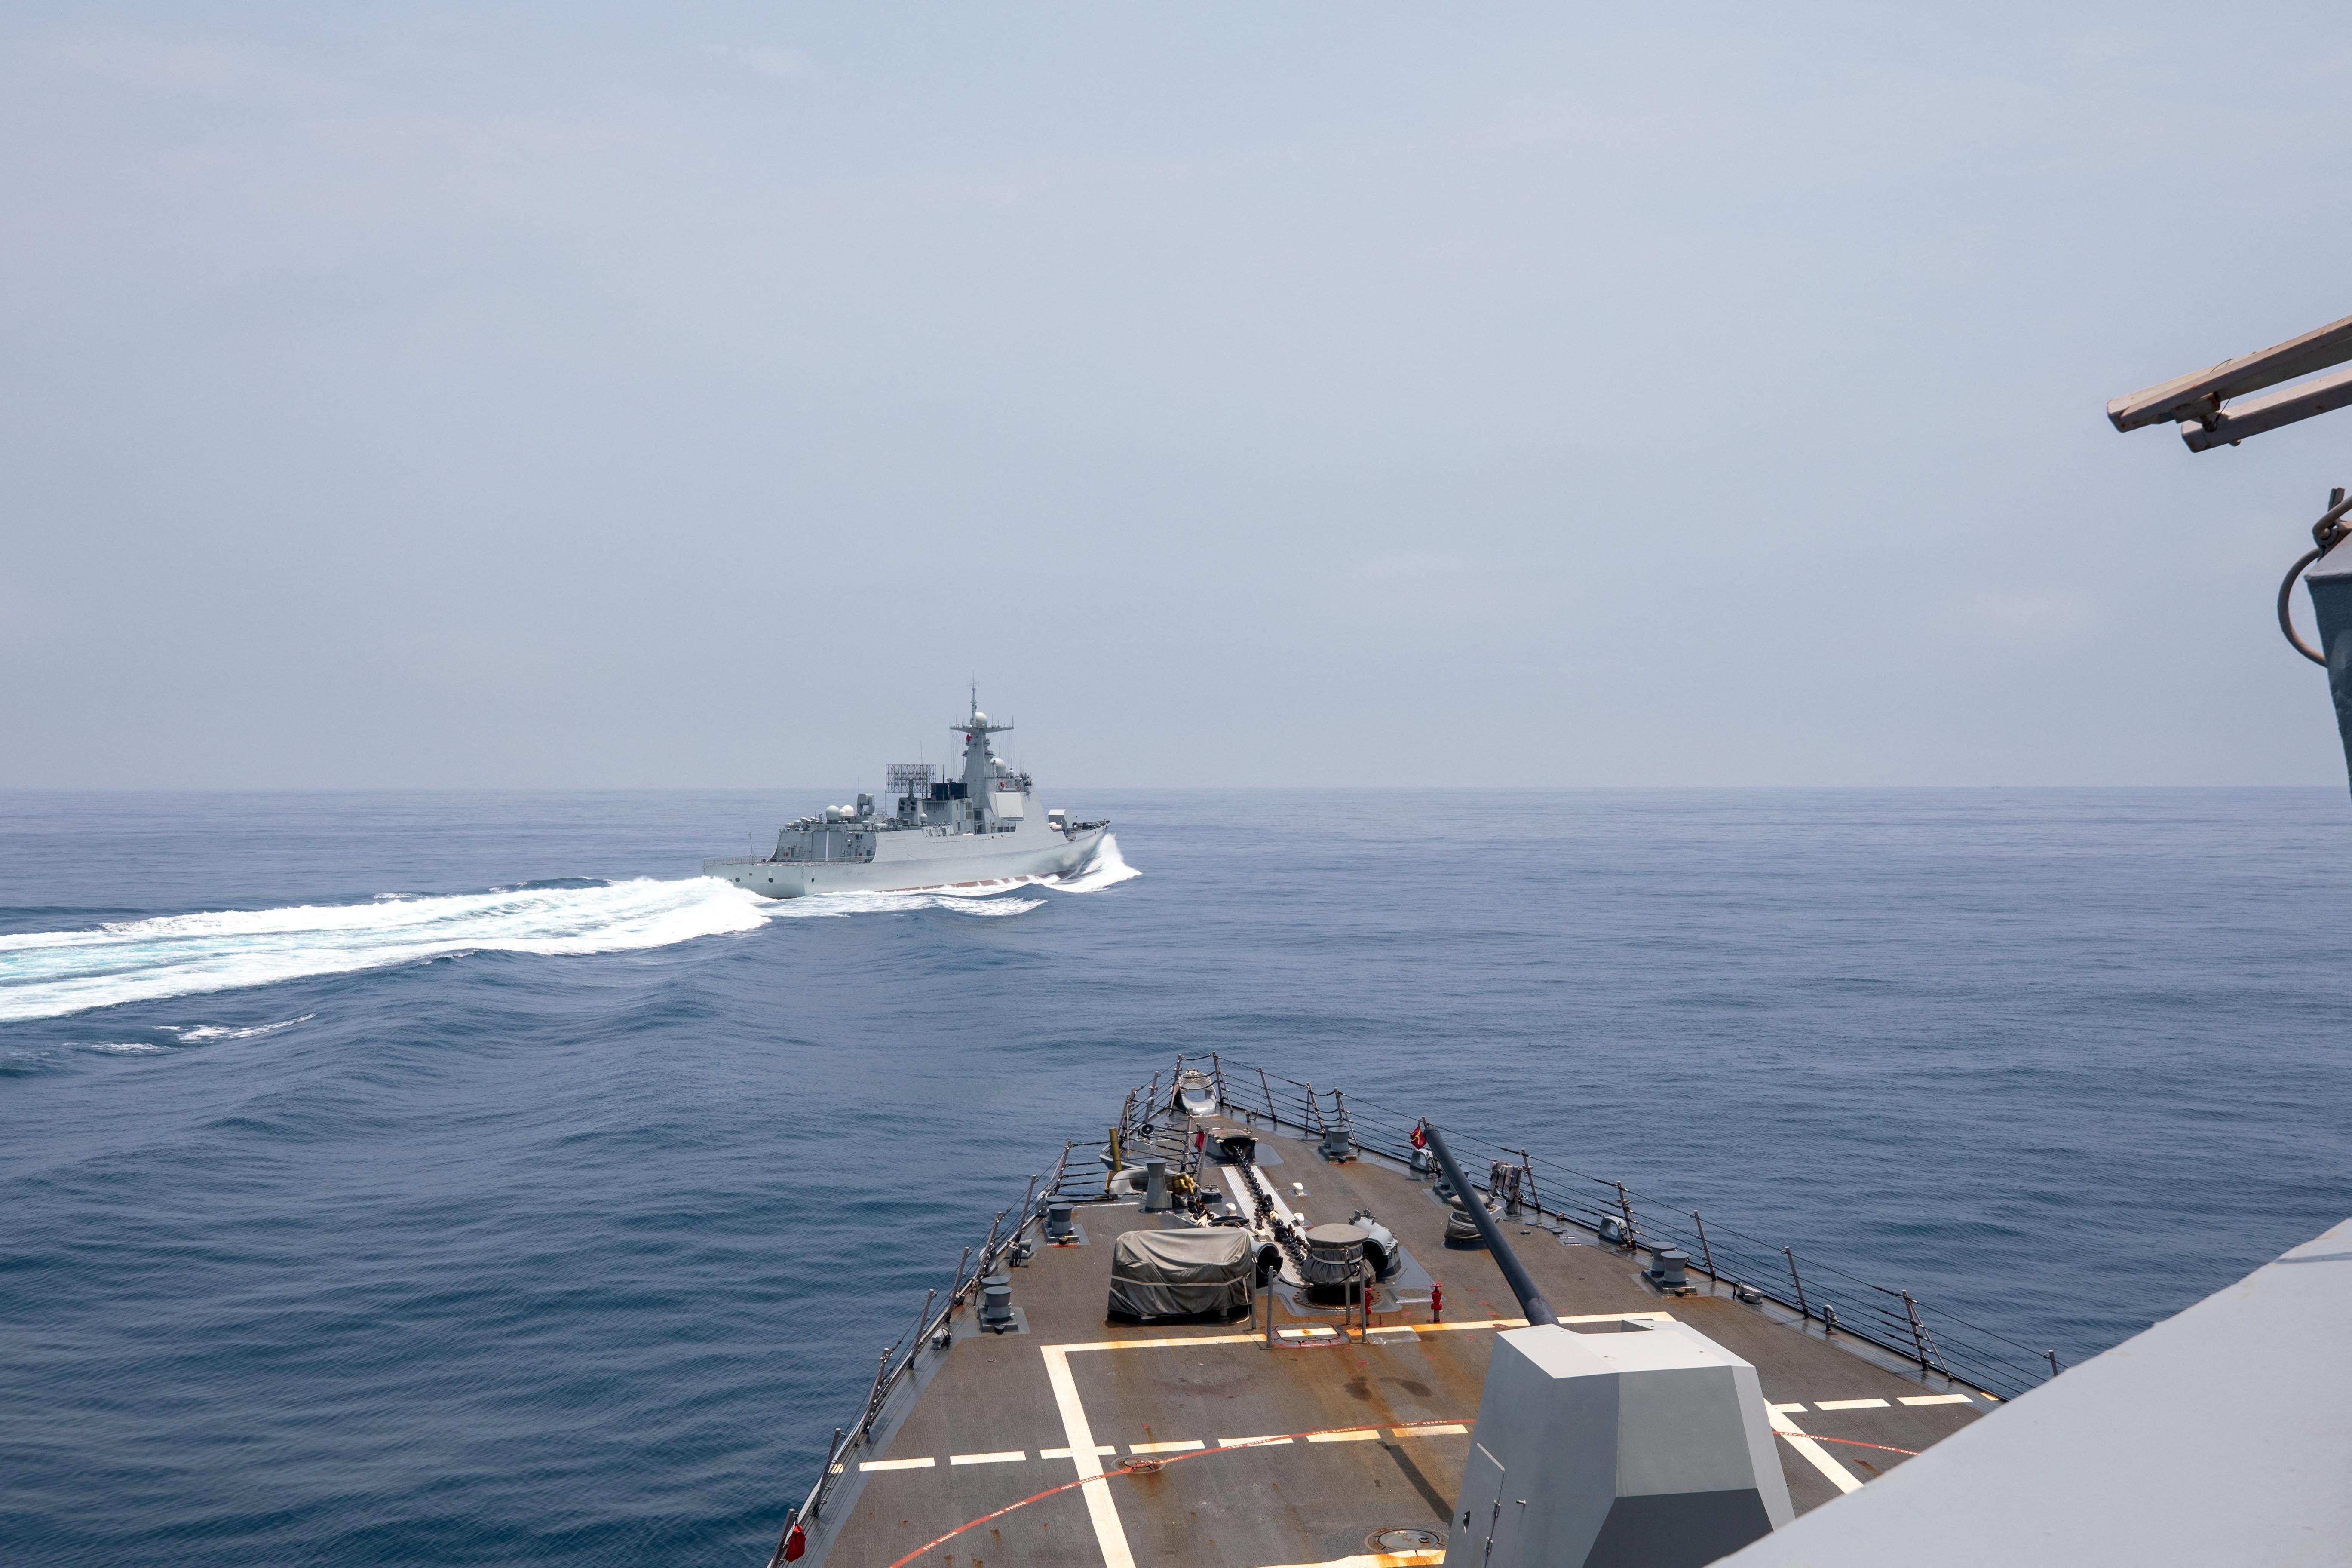 Chinese warship Luyang III sails near the U.S. destroyer USS Chung-Hoon, as seen from the deck of U.S. destroyer, in the Taiwan Strait